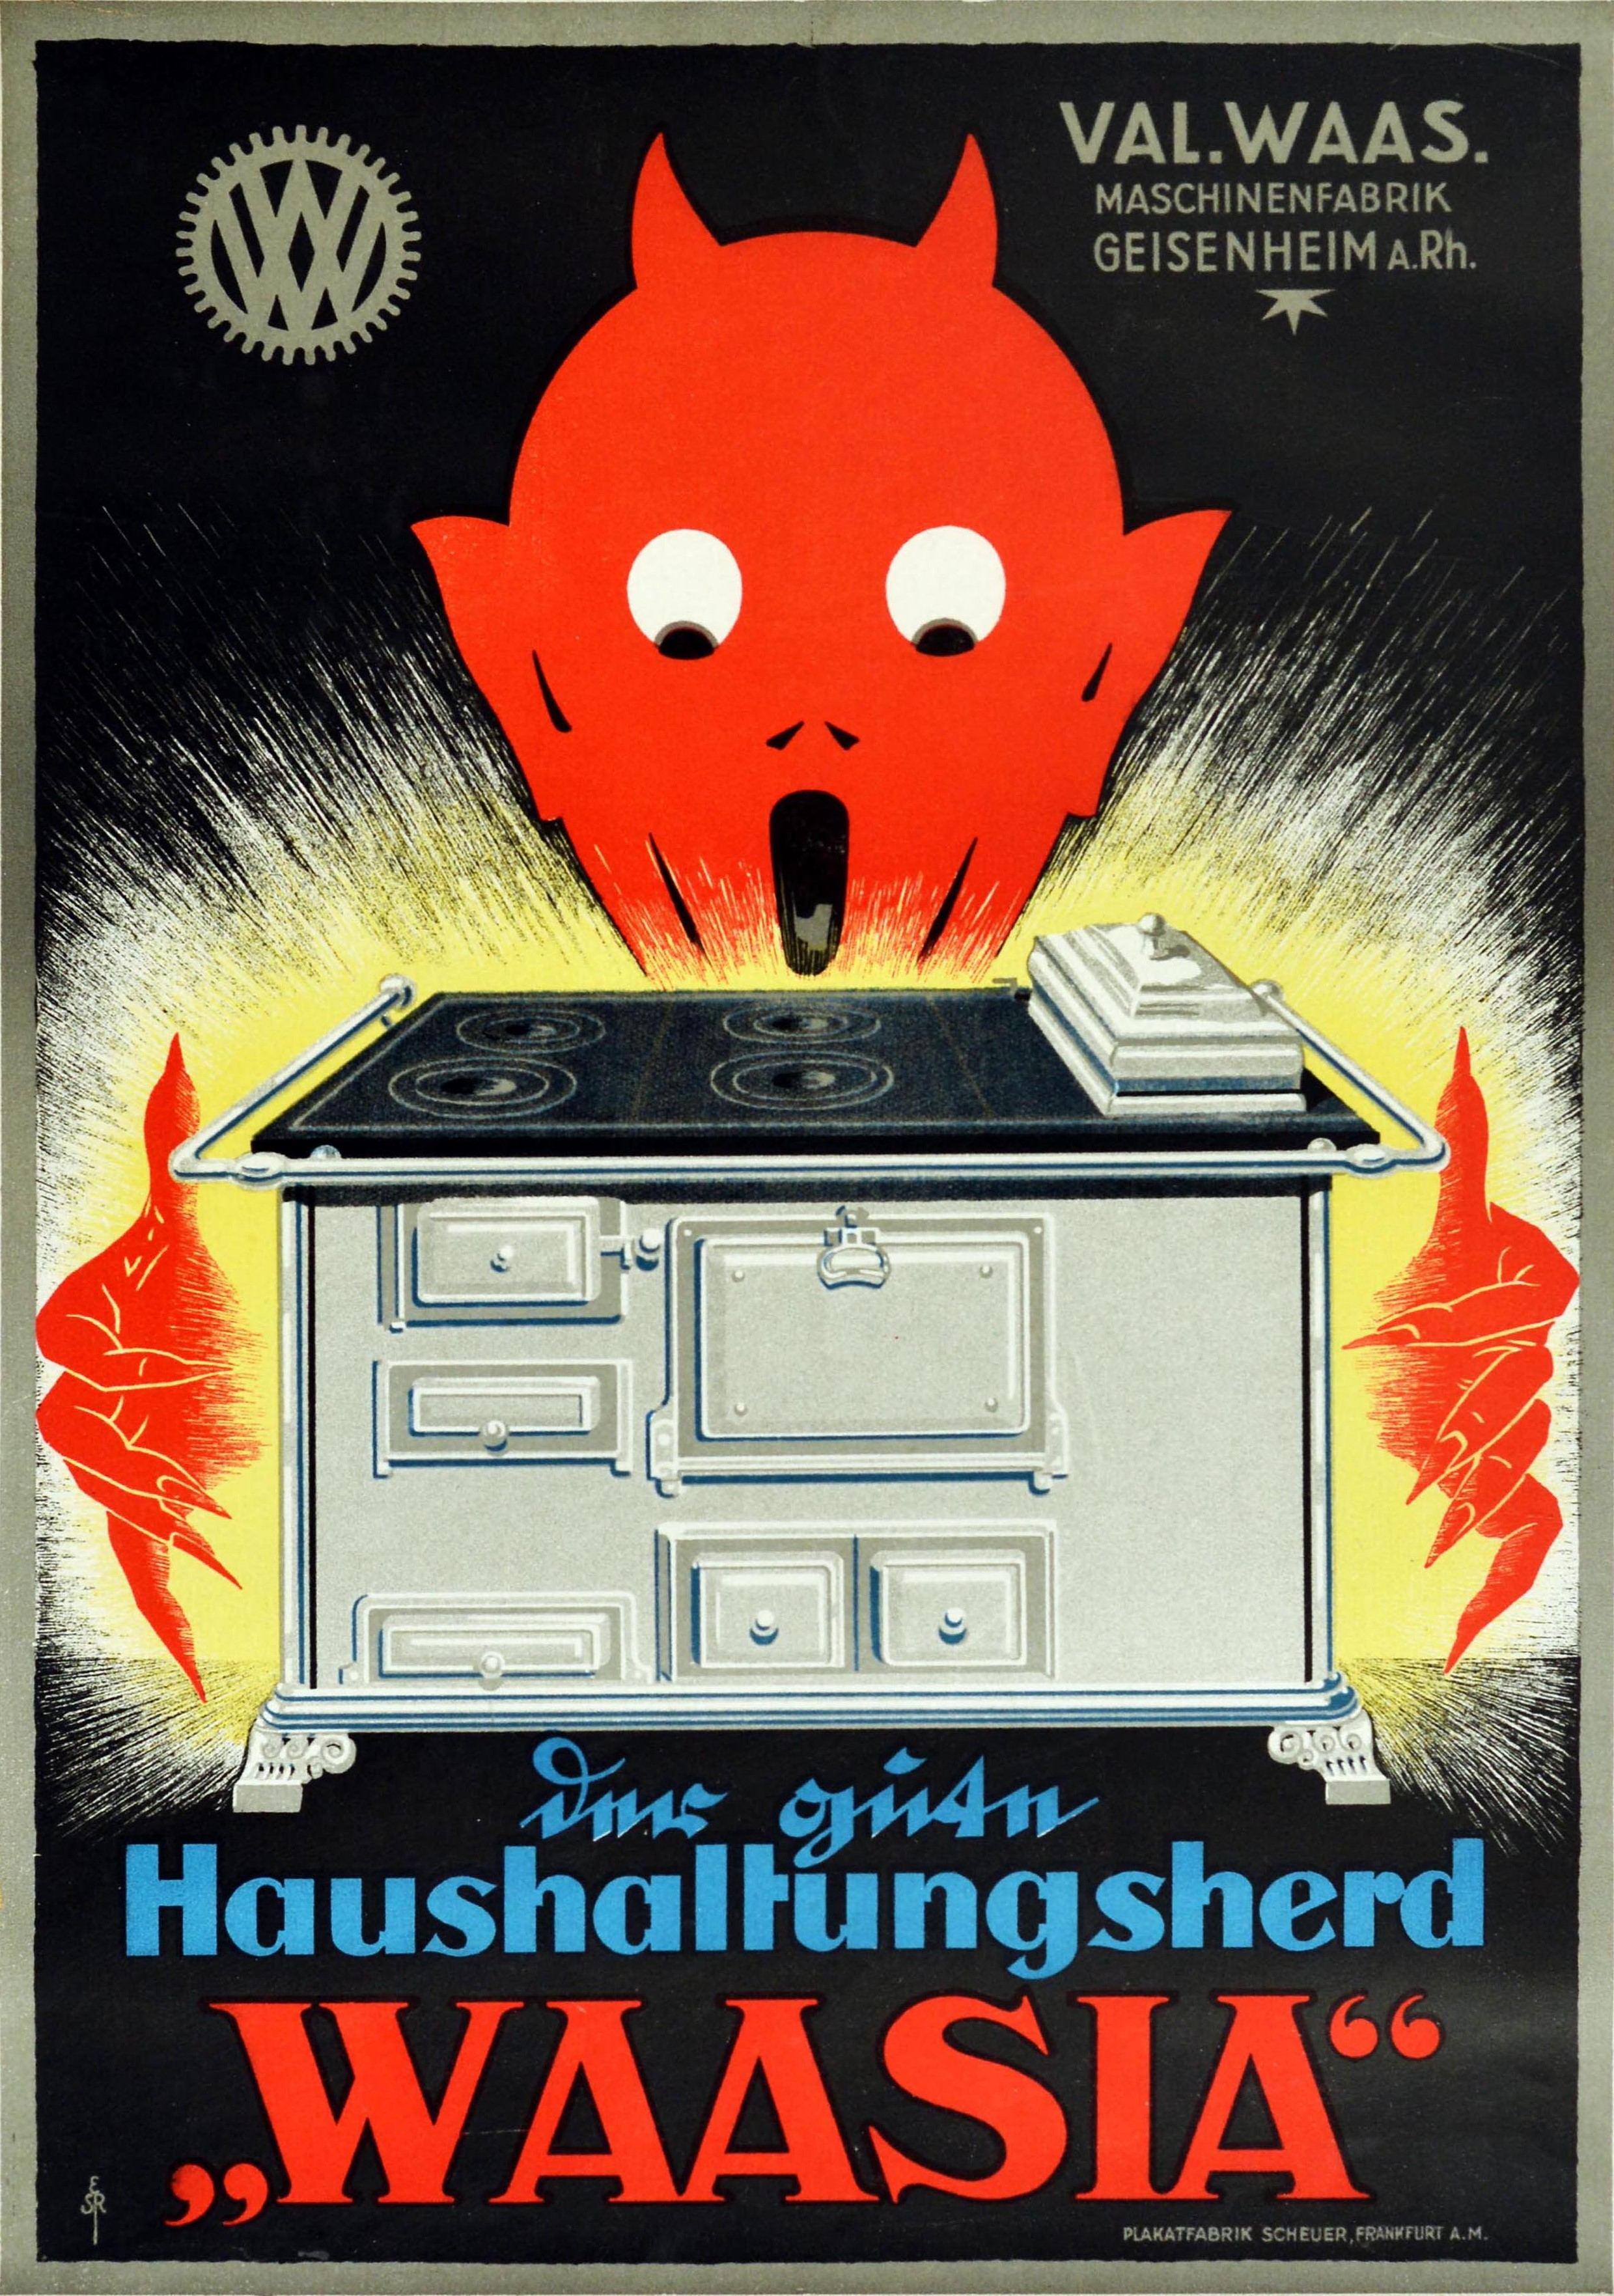 Original vintage advertising poster for a Waasia household oven stove produced by the Val Waas machine factory featuring a dynamic illustration of a surprised looking devil in red admiring a cooker with rays of yellow and white light surrounding it,